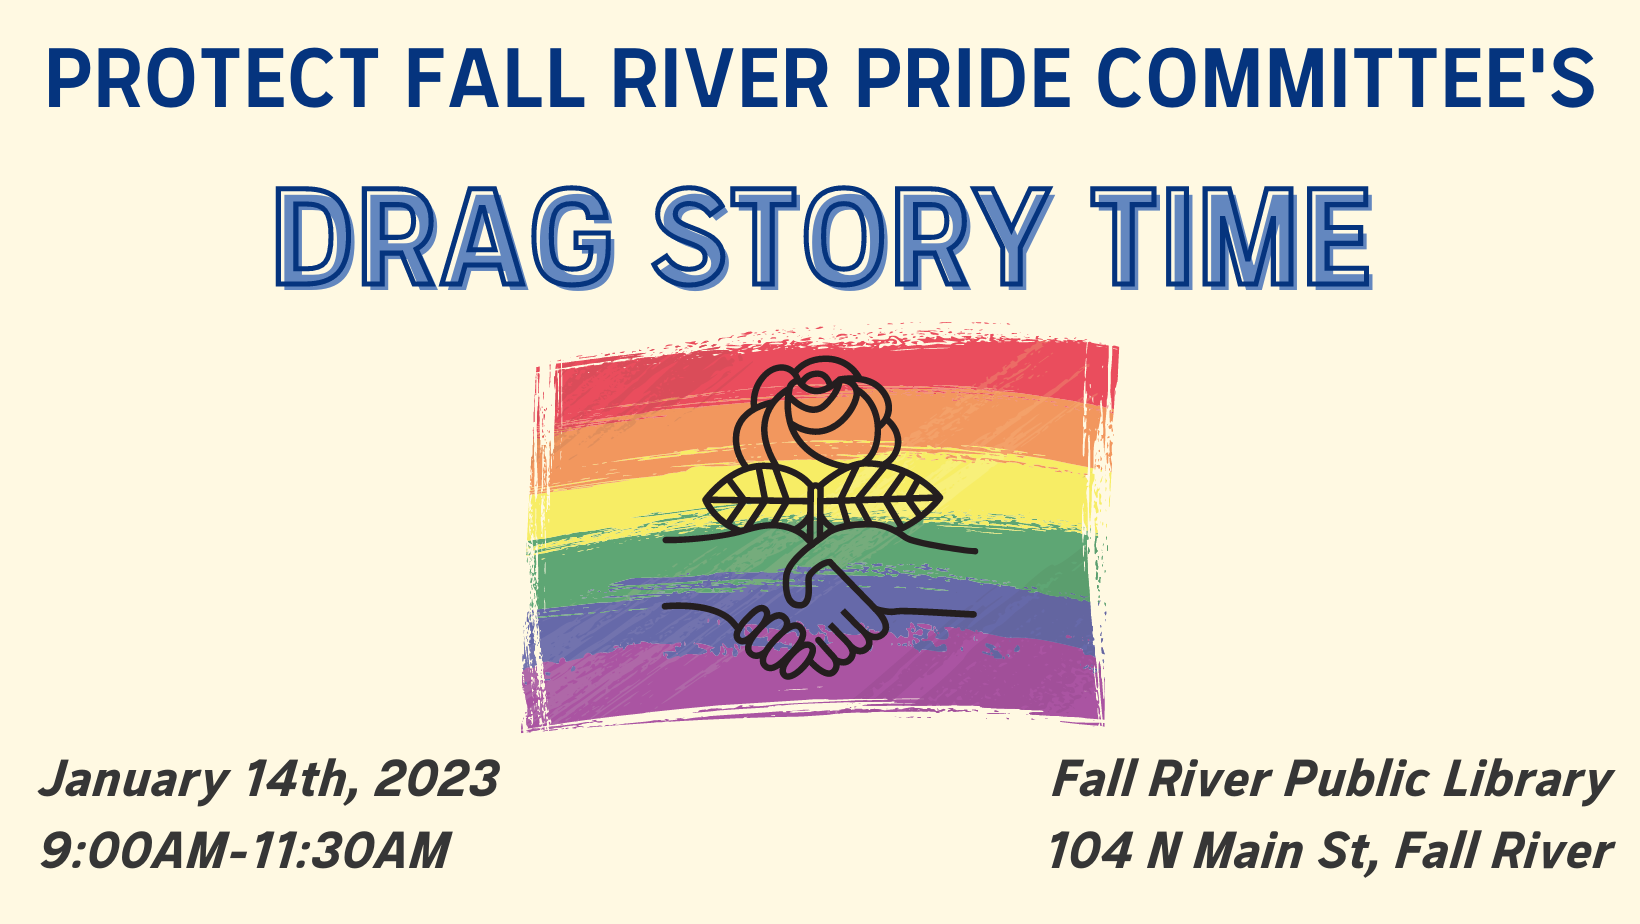 Protect Fall River's Drag Story Time. January 14th, 2023 from 9-11:30am at the Fall River Public Library.